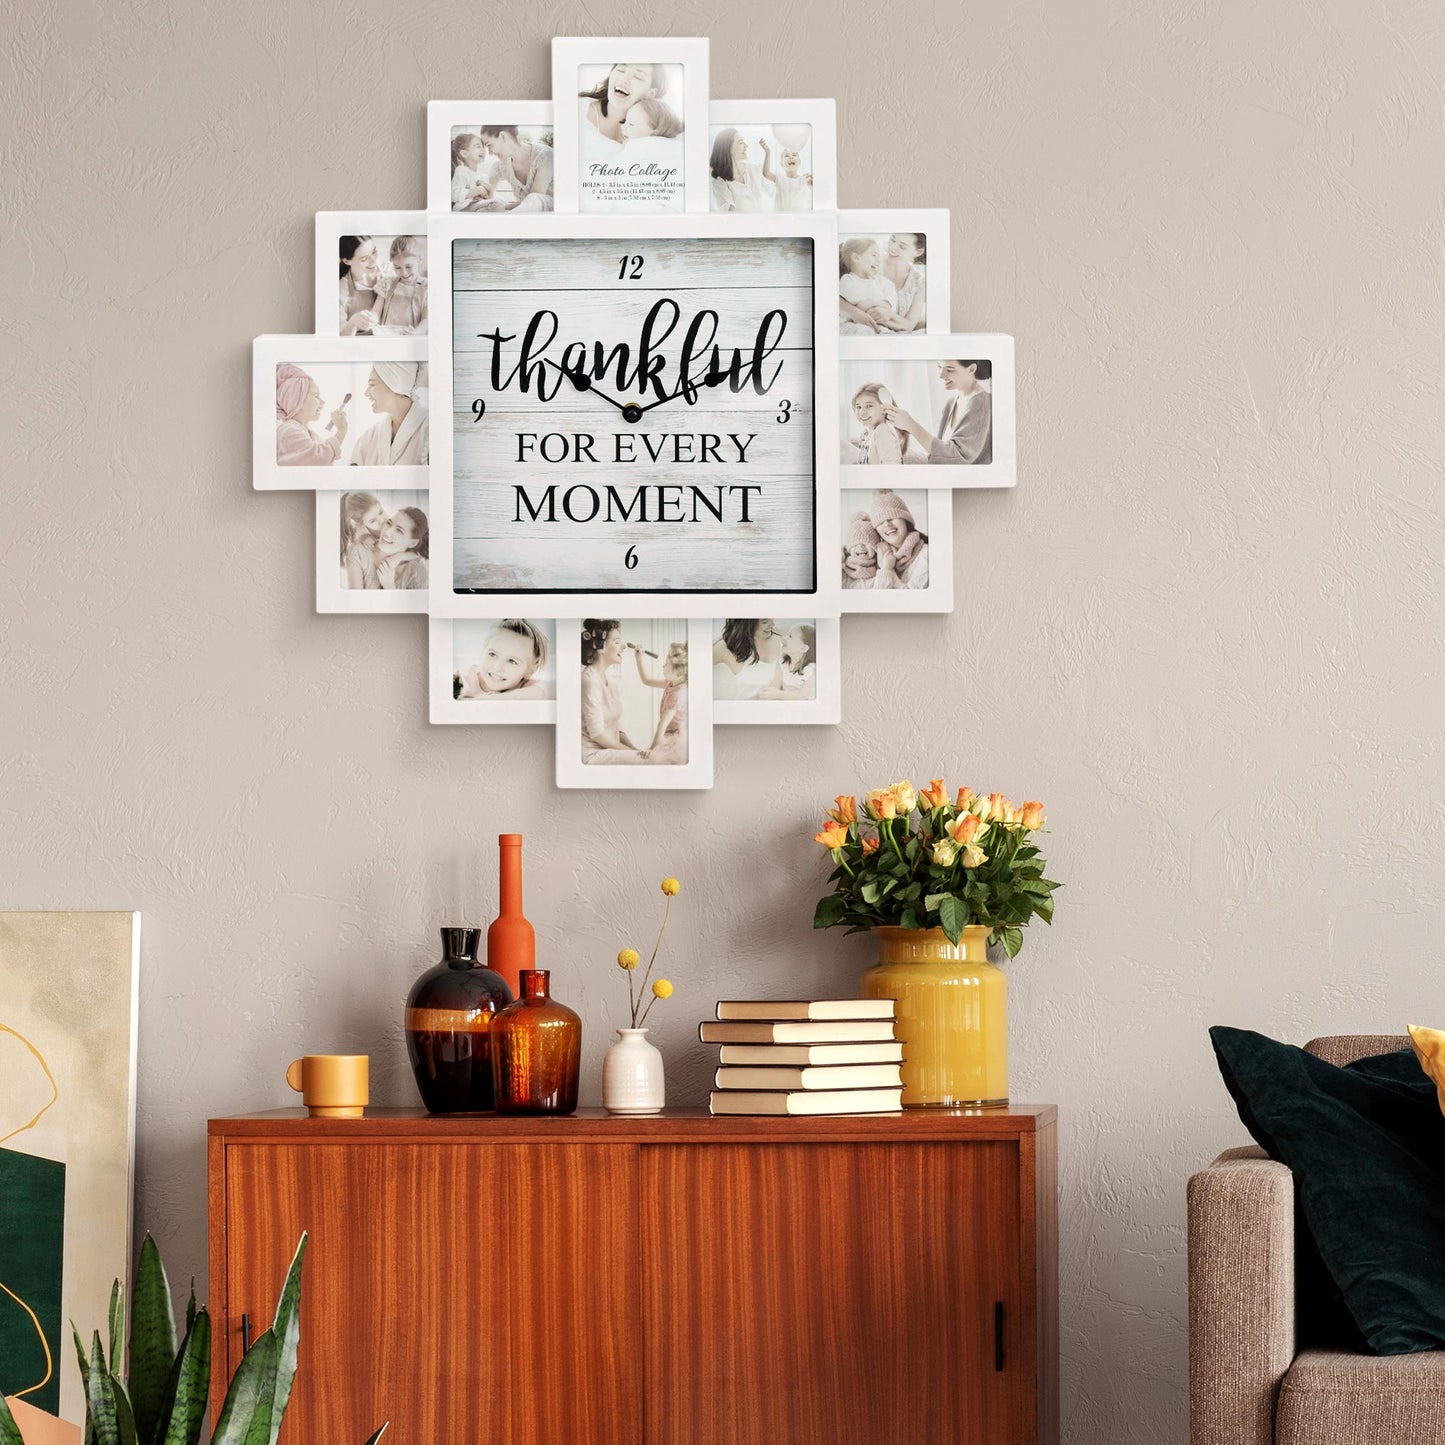 White Farmhouse Shabby-Chic "Thankful" Picture Frame Wall Collage Clock